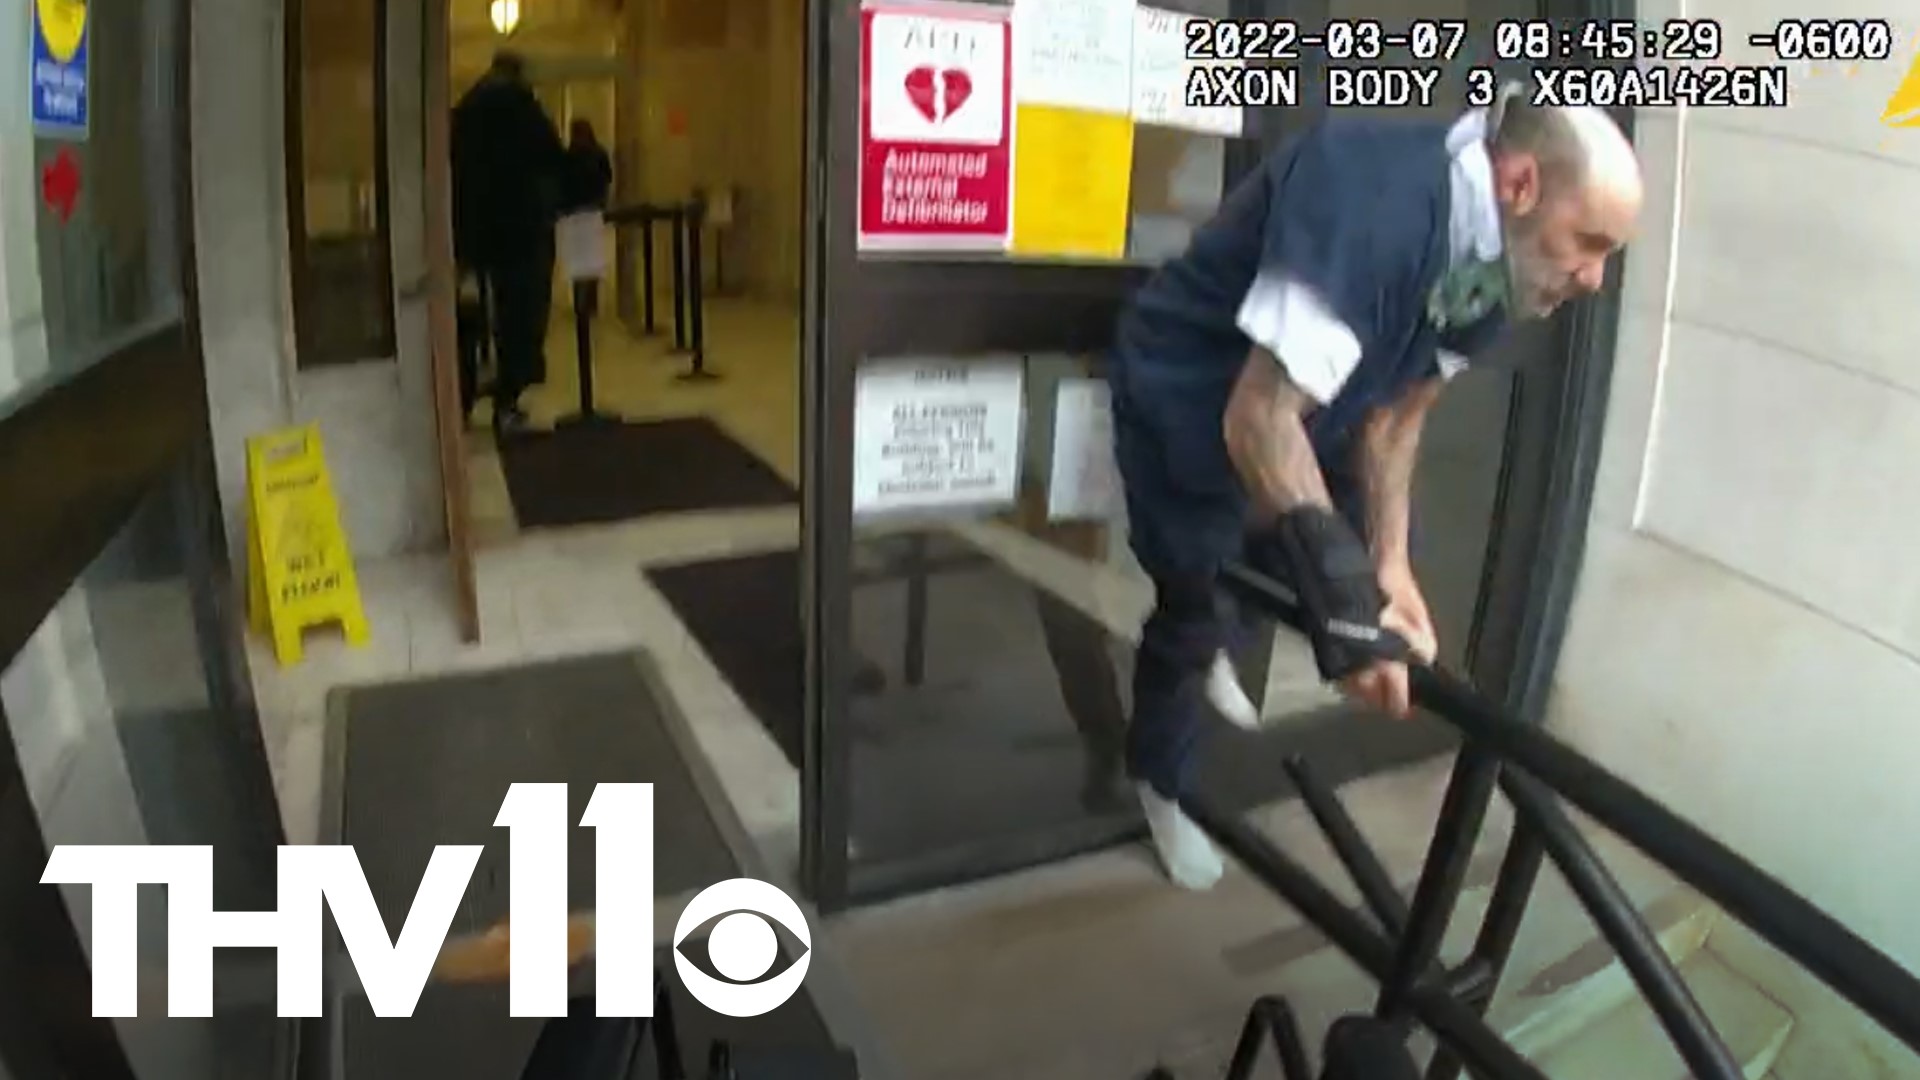 In this bodycam footage, Joel Delgado is seen jumping out of a wheelchair near a Little Rock courthouse and running away from police. He was later apprehended.